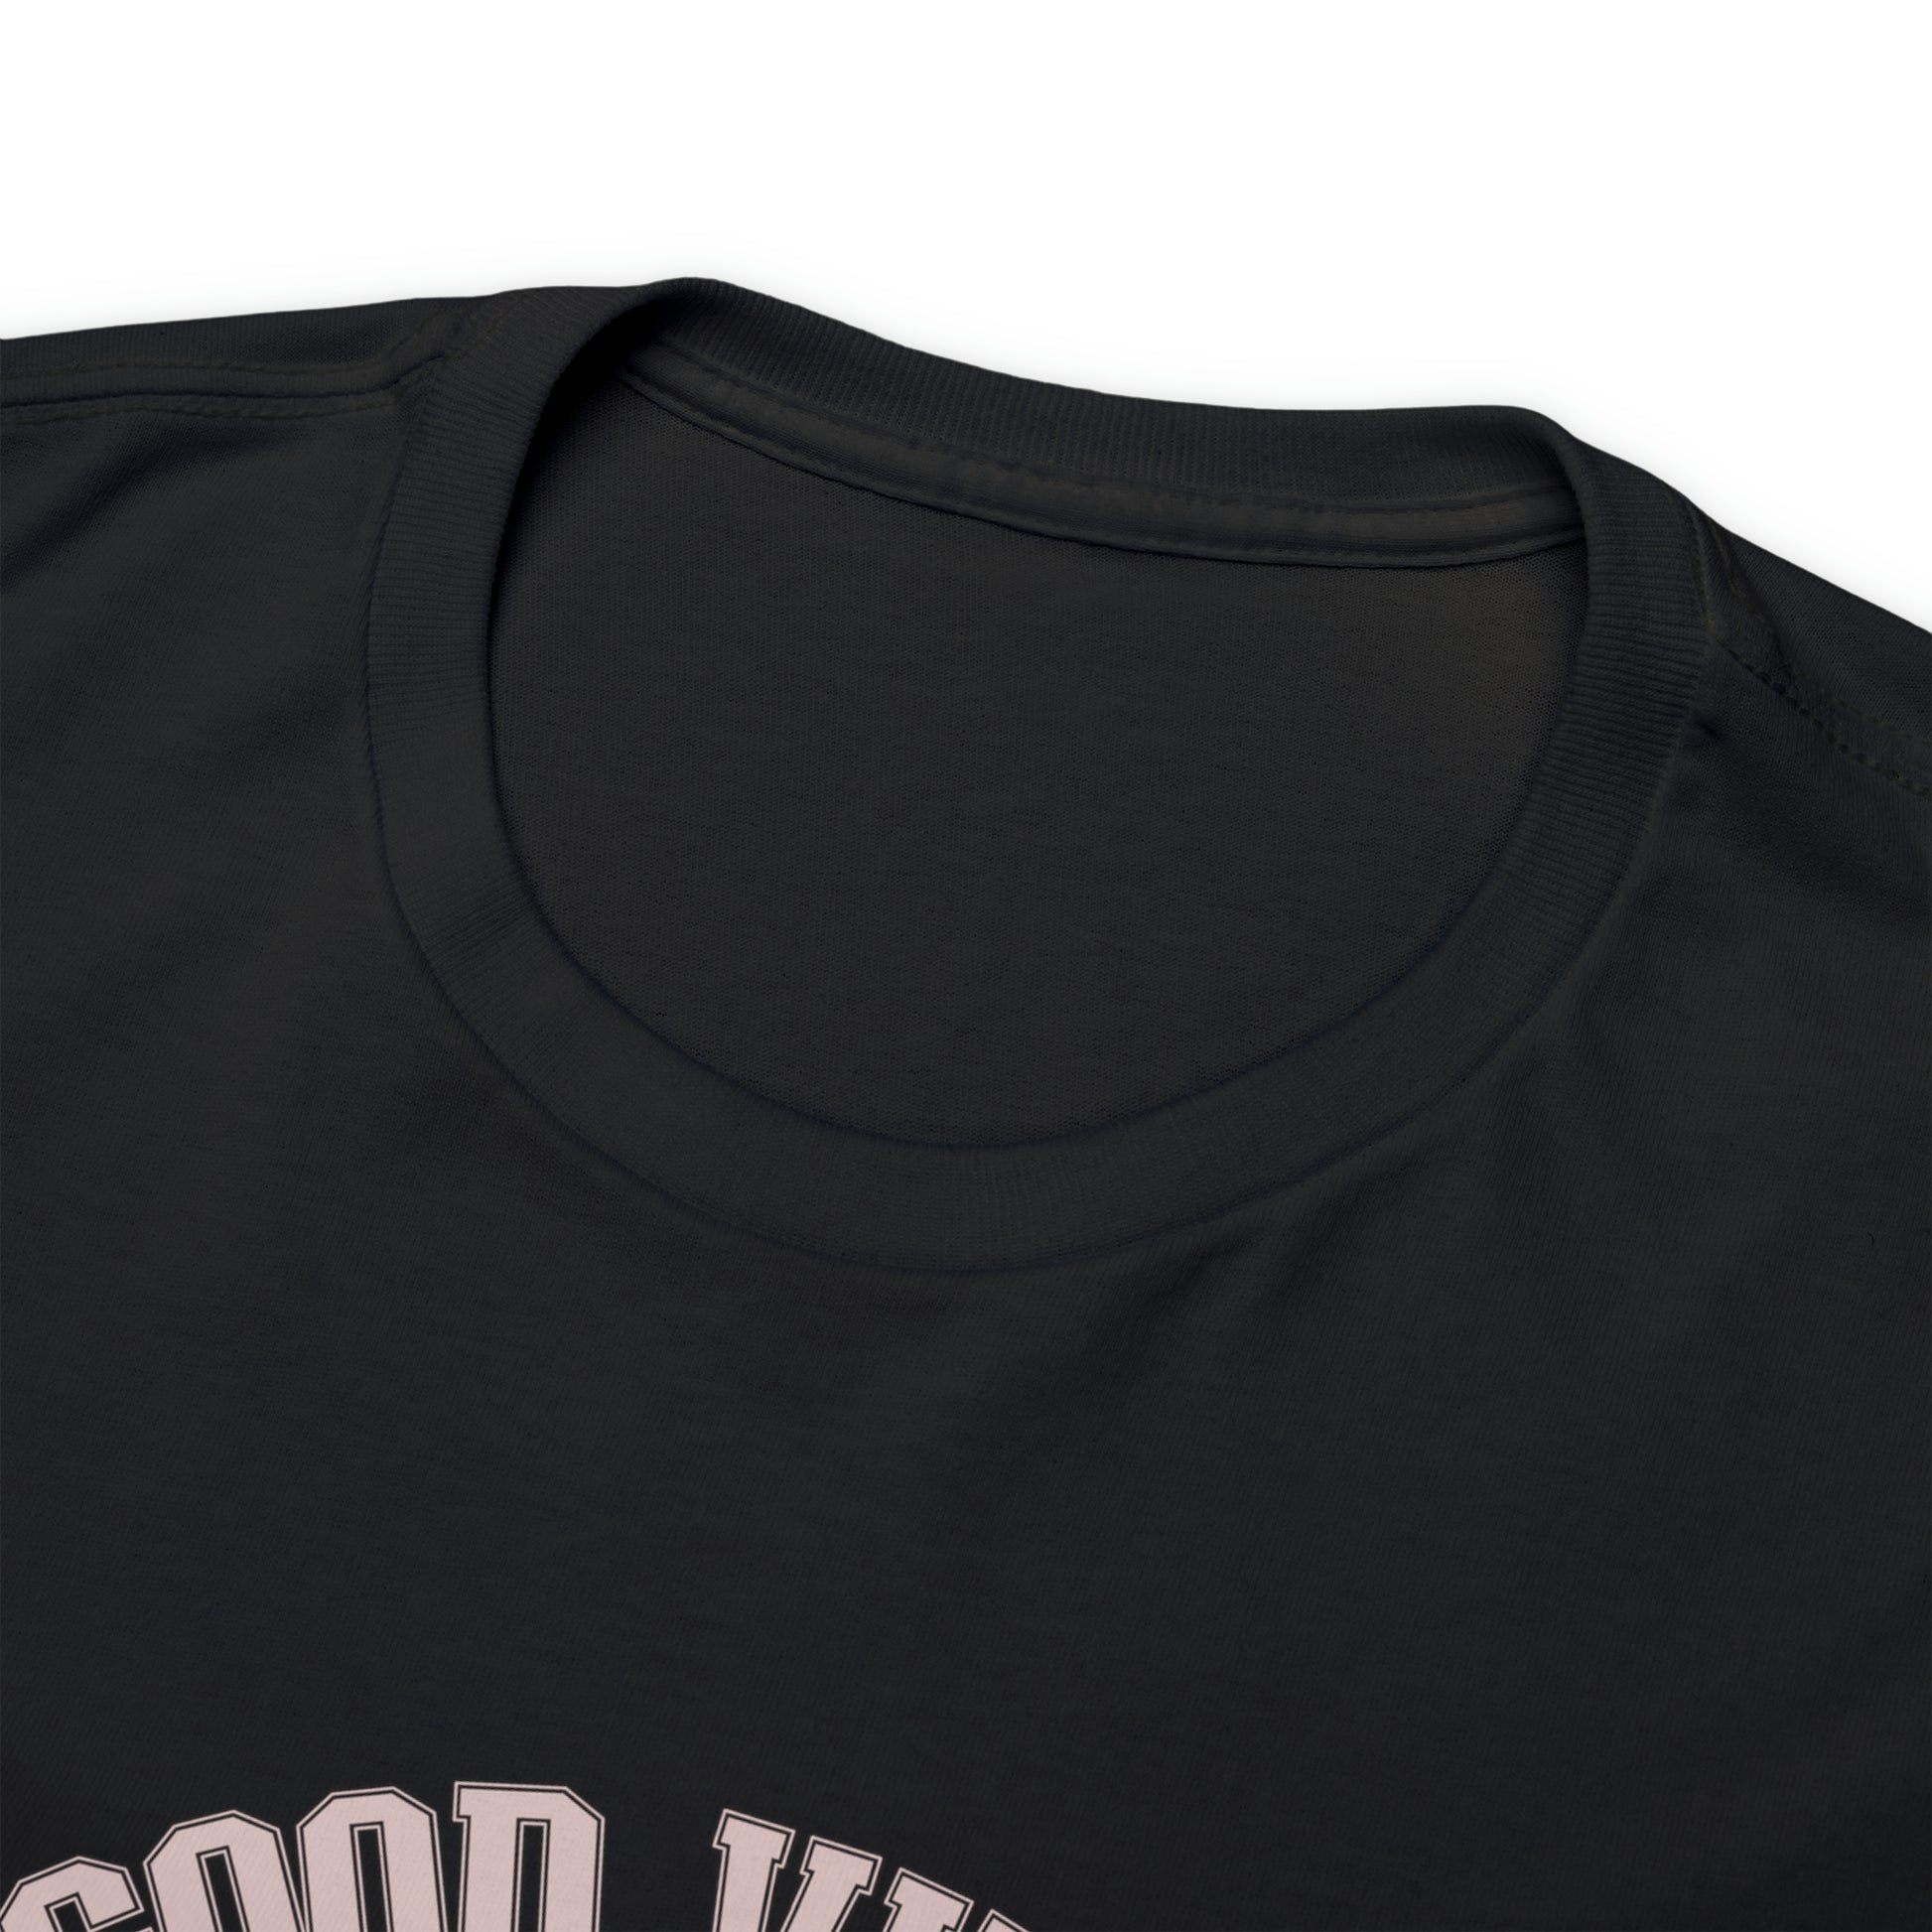 Good vibes member only T shirt